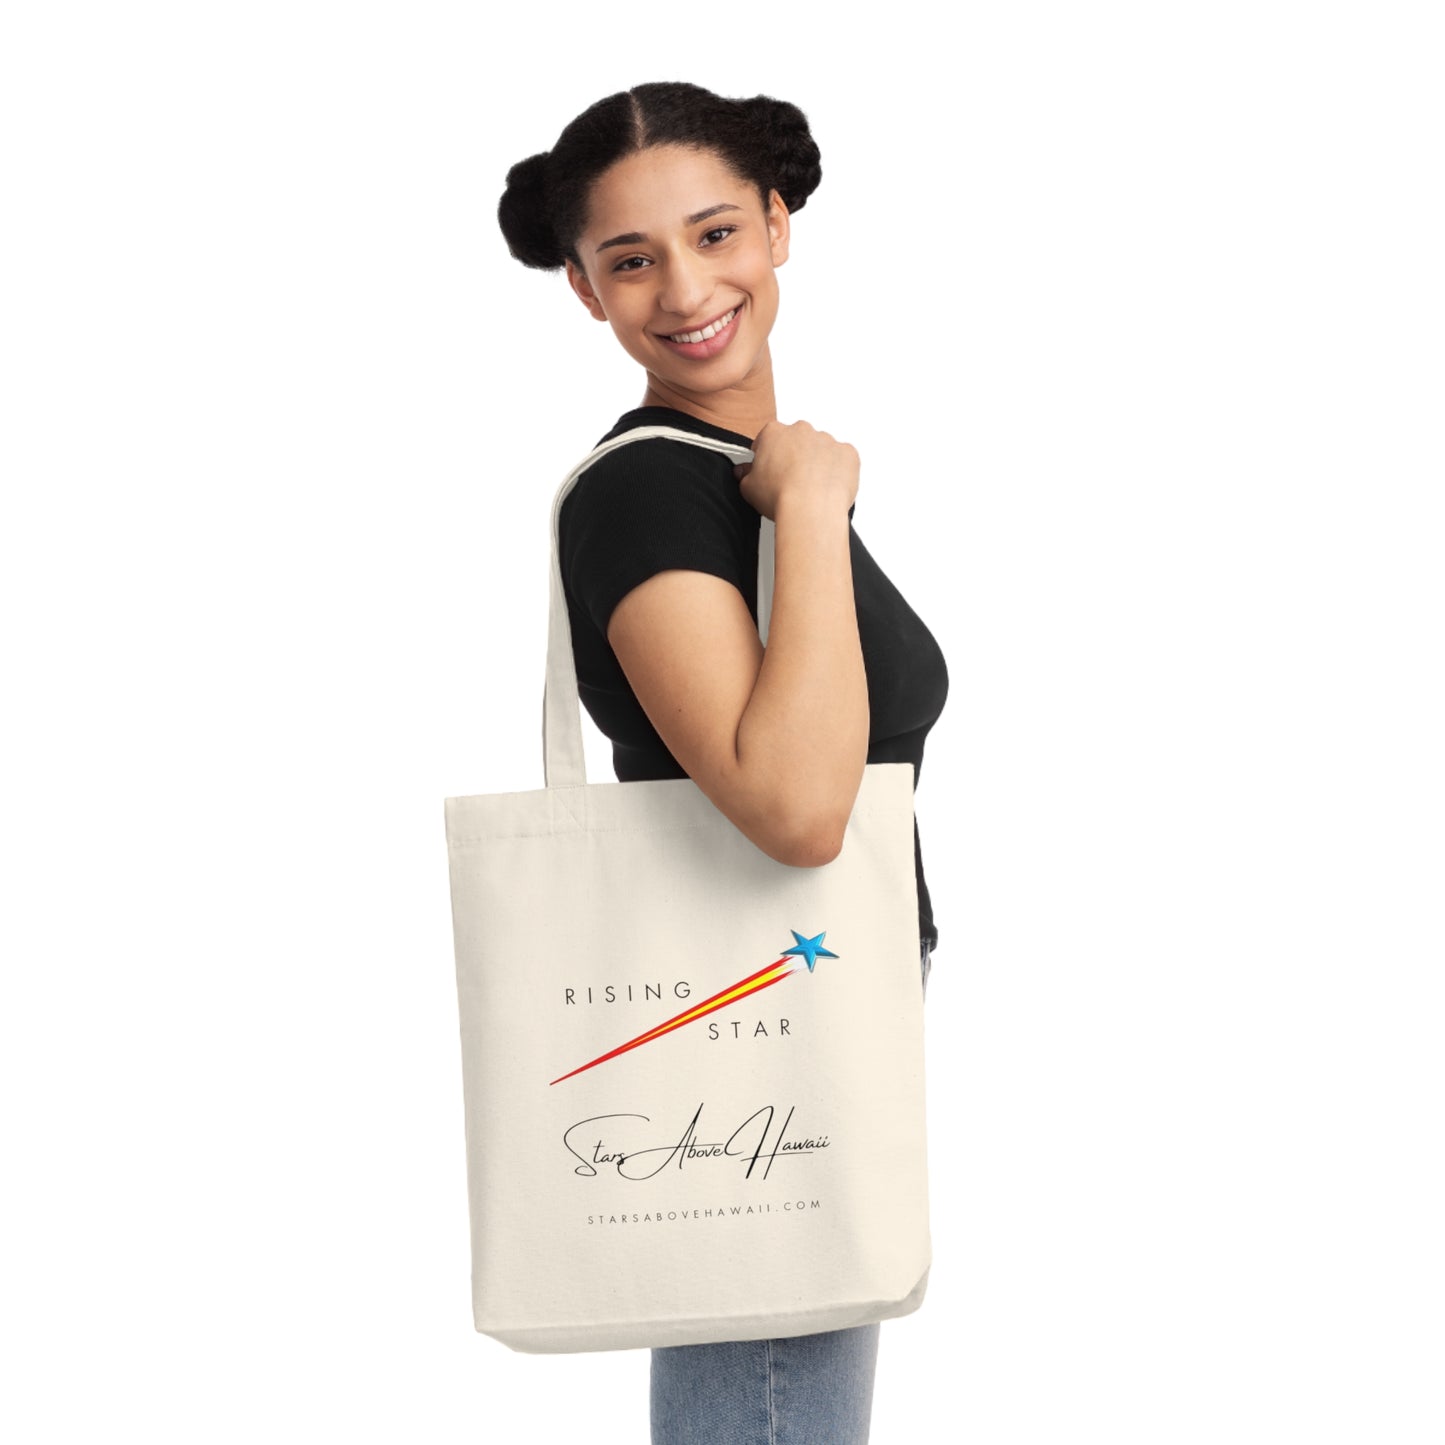 Rising Star Tote Bag - One of a Kind Specialty Item